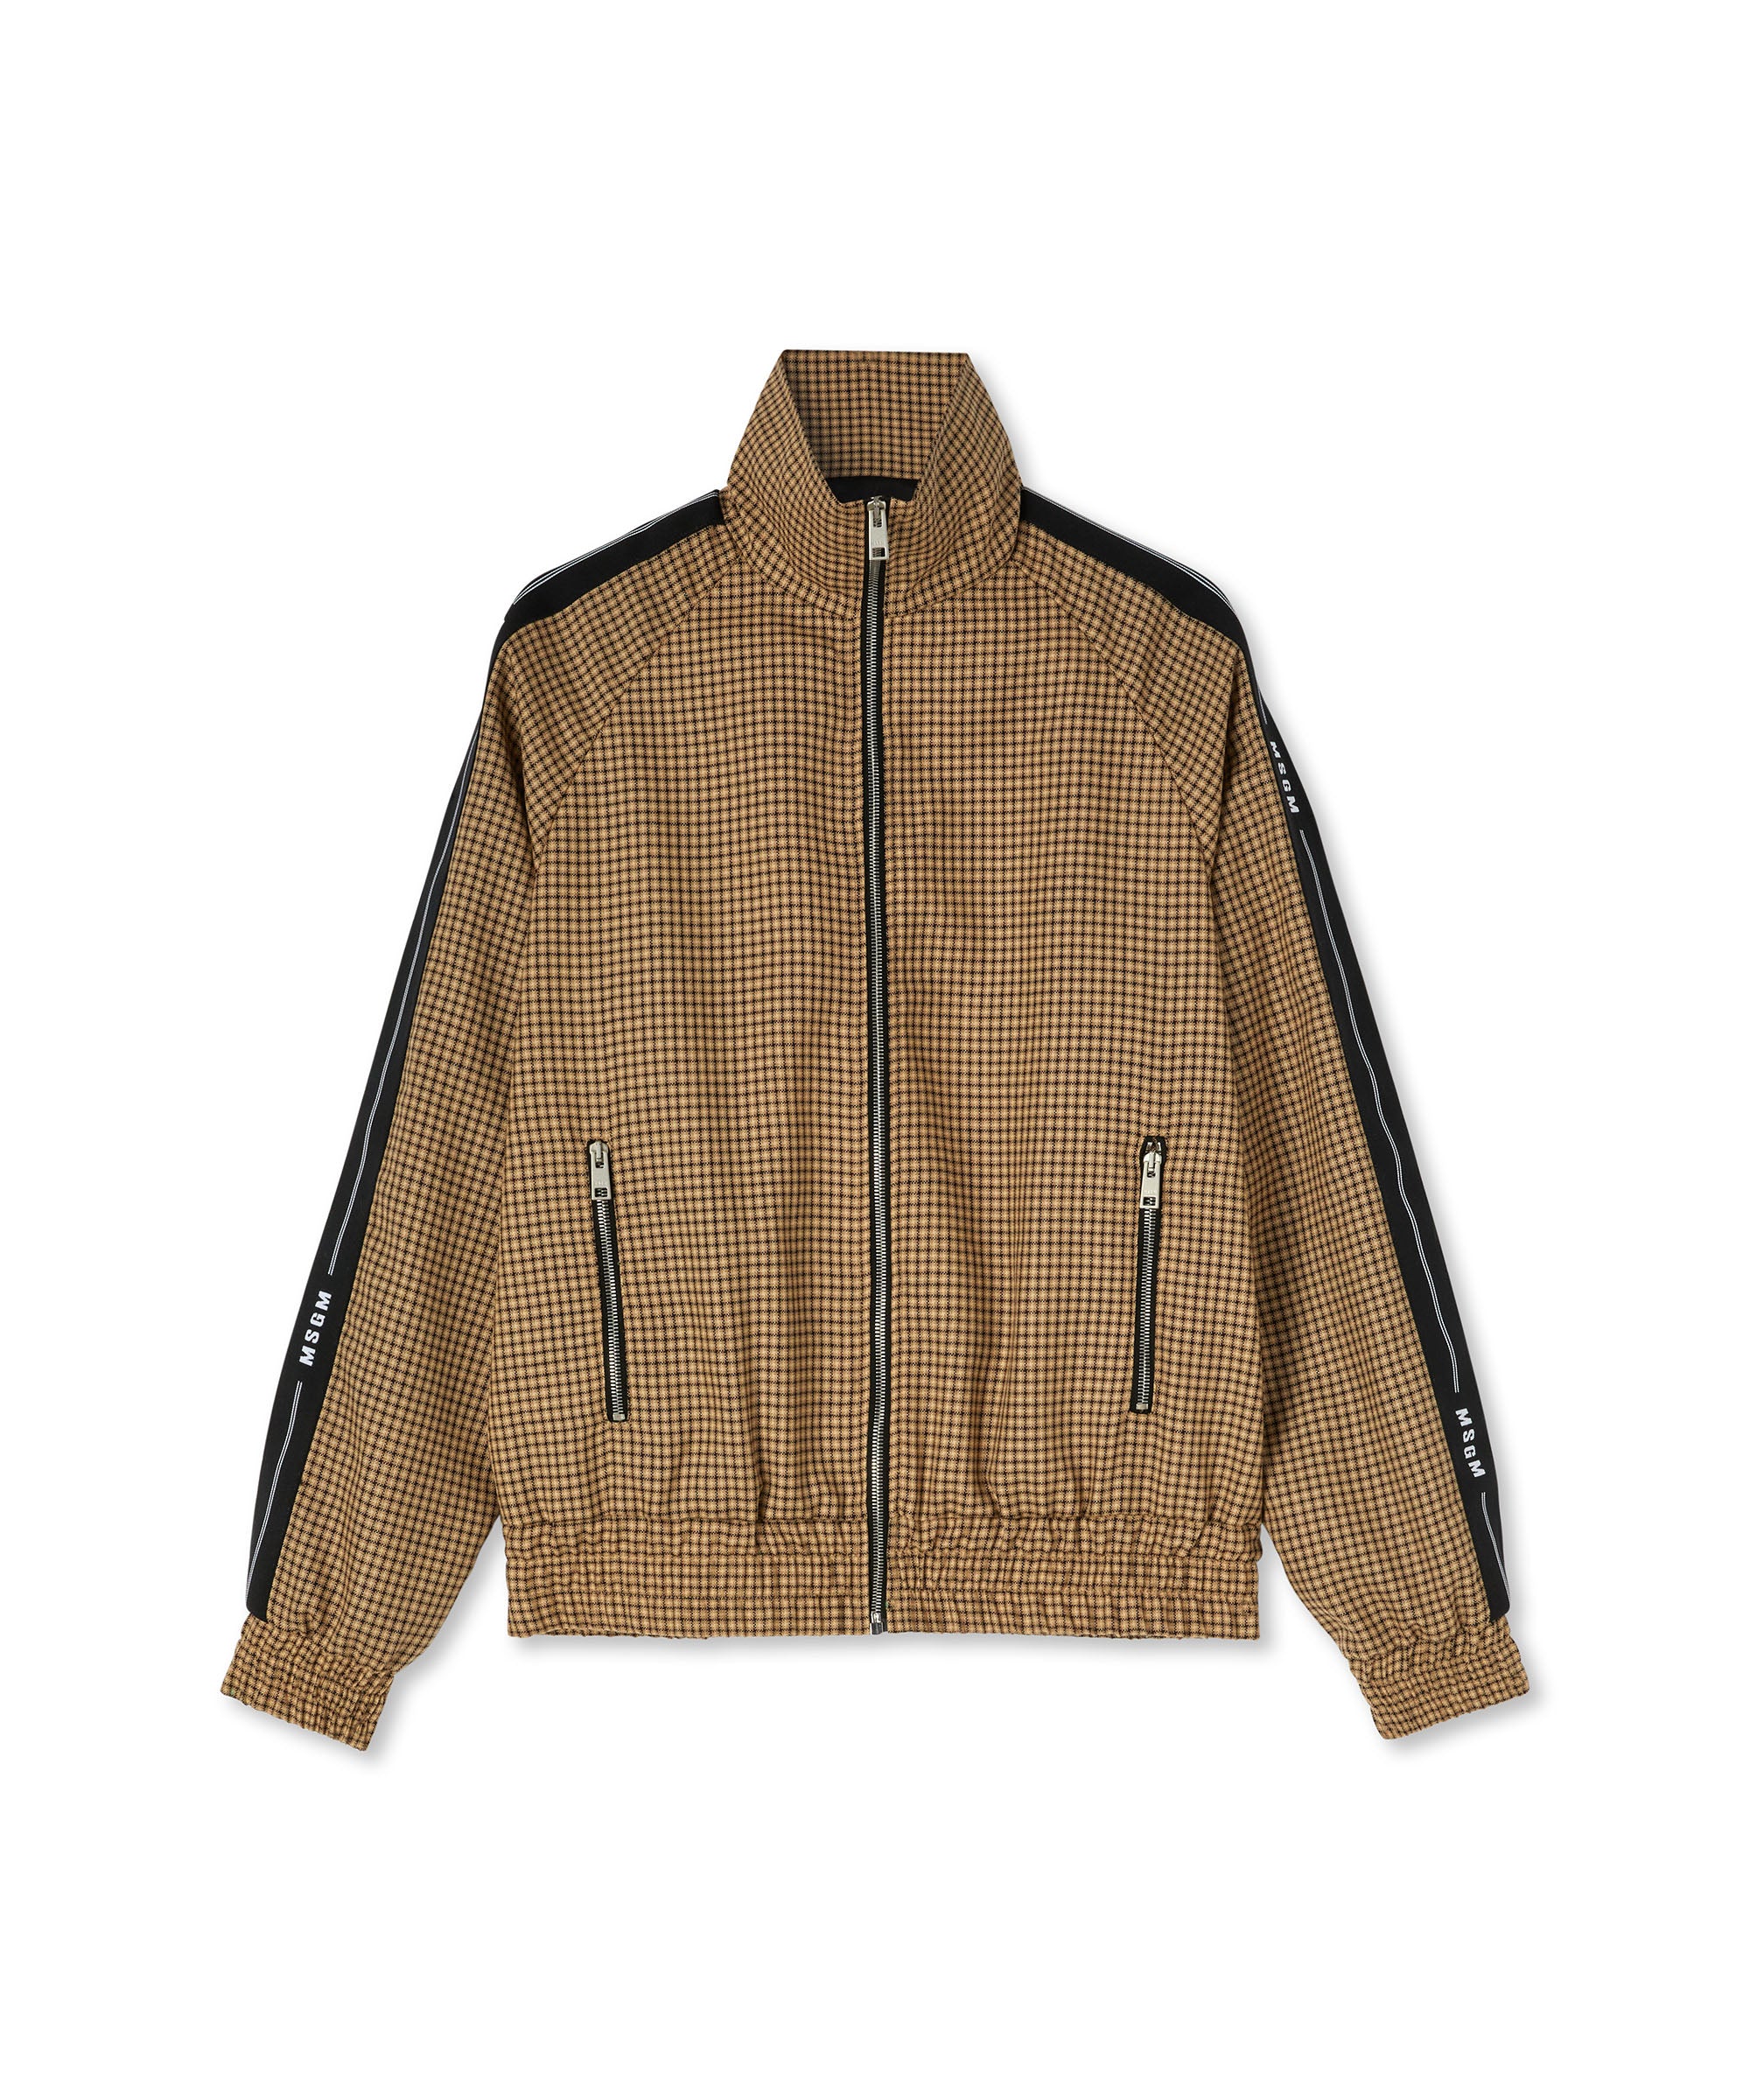 Men's Jackets and Coats – MSGM Shop ROW - MSGM Official